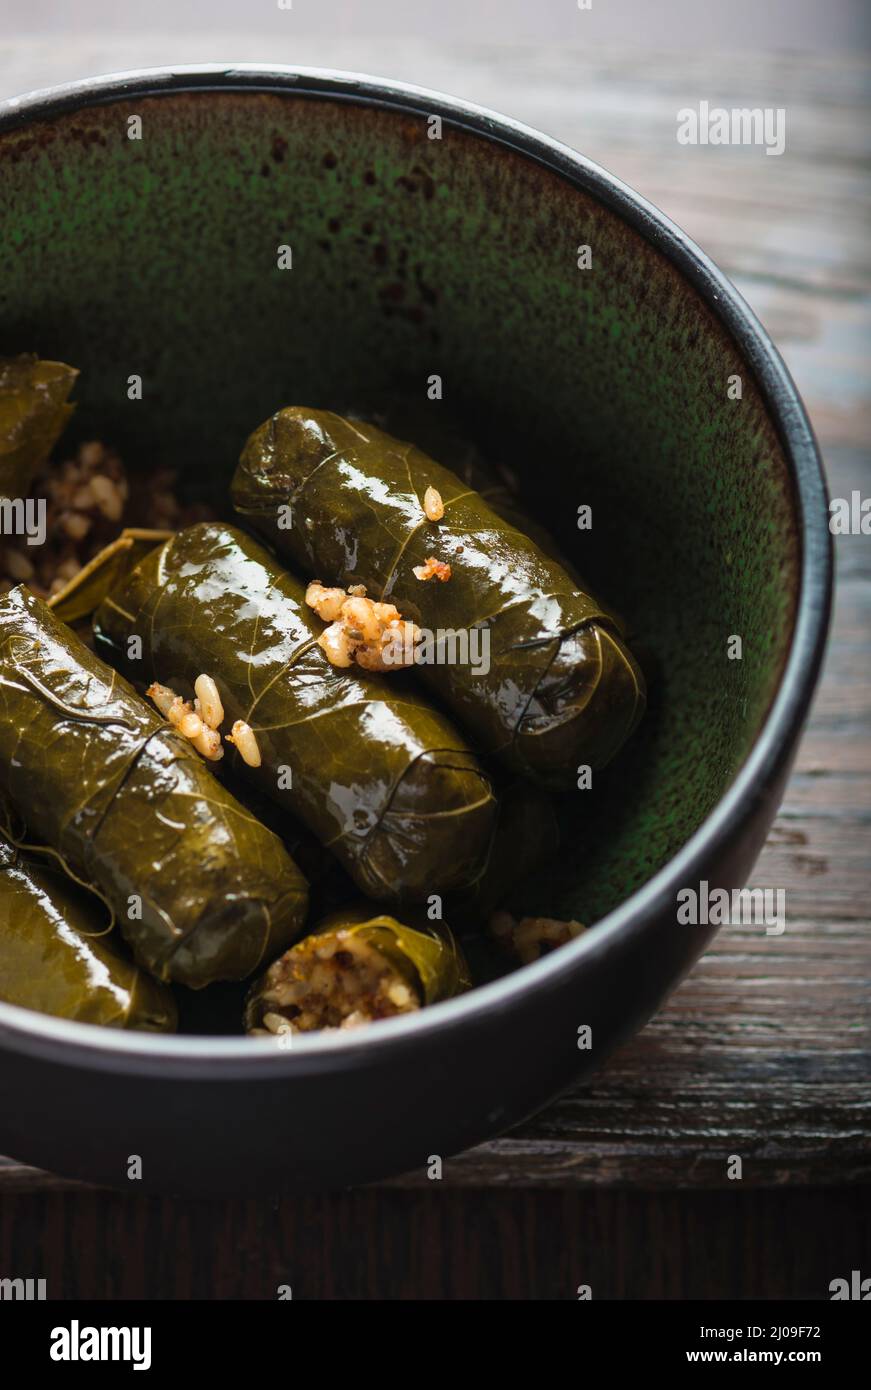 Stuffed vine leaves, or Dolmades, in a bowl. Close up. Vine leaves with stuffed rice. Middle eastern traditional food and cuisine. Stock Photo